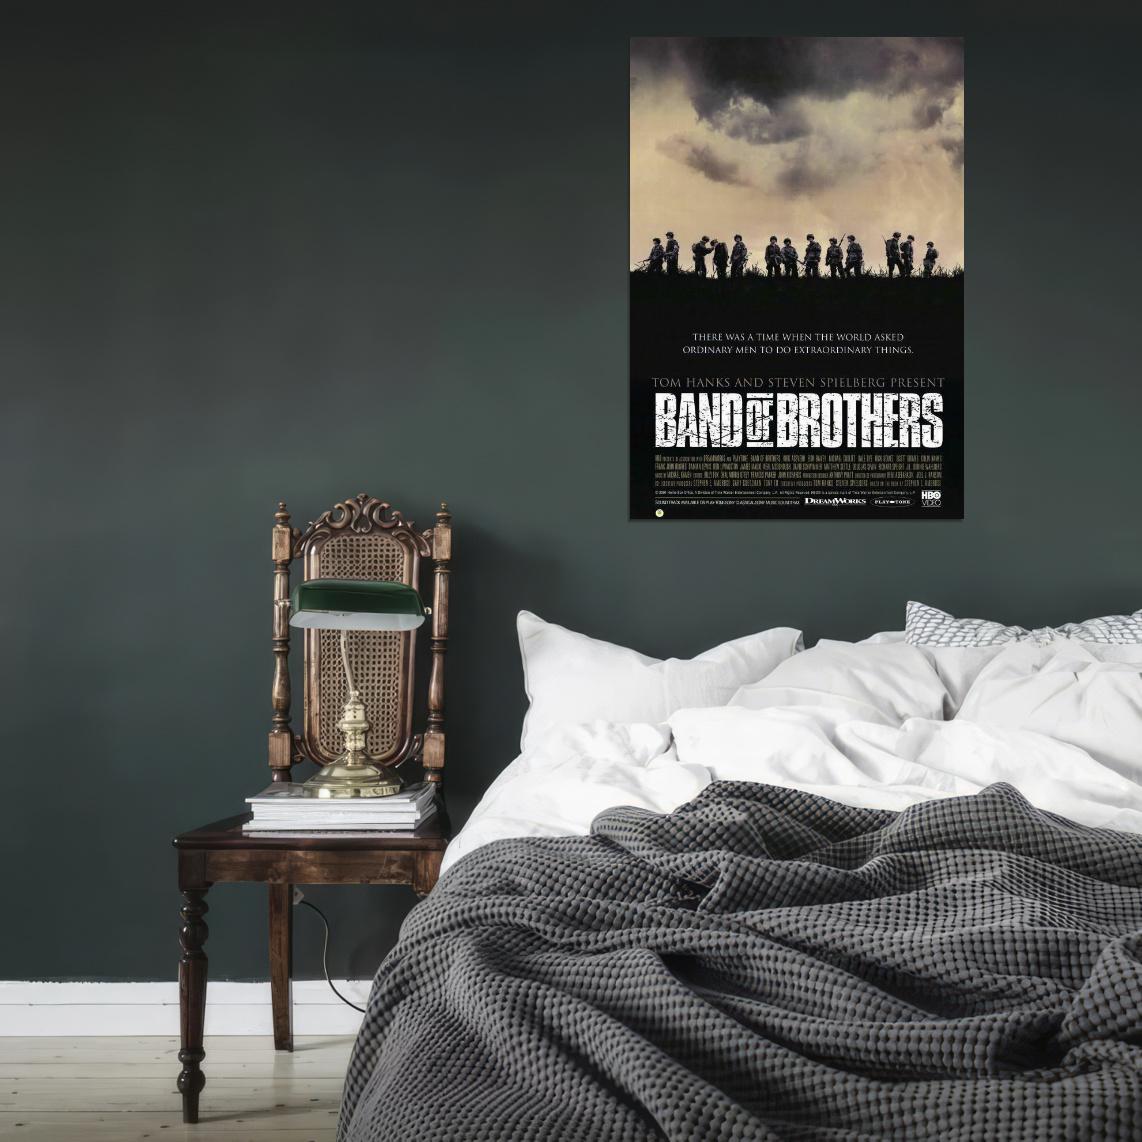 Band of Brothers Movie Poster 2001 Film Wall Art Decor PRINT POSTER